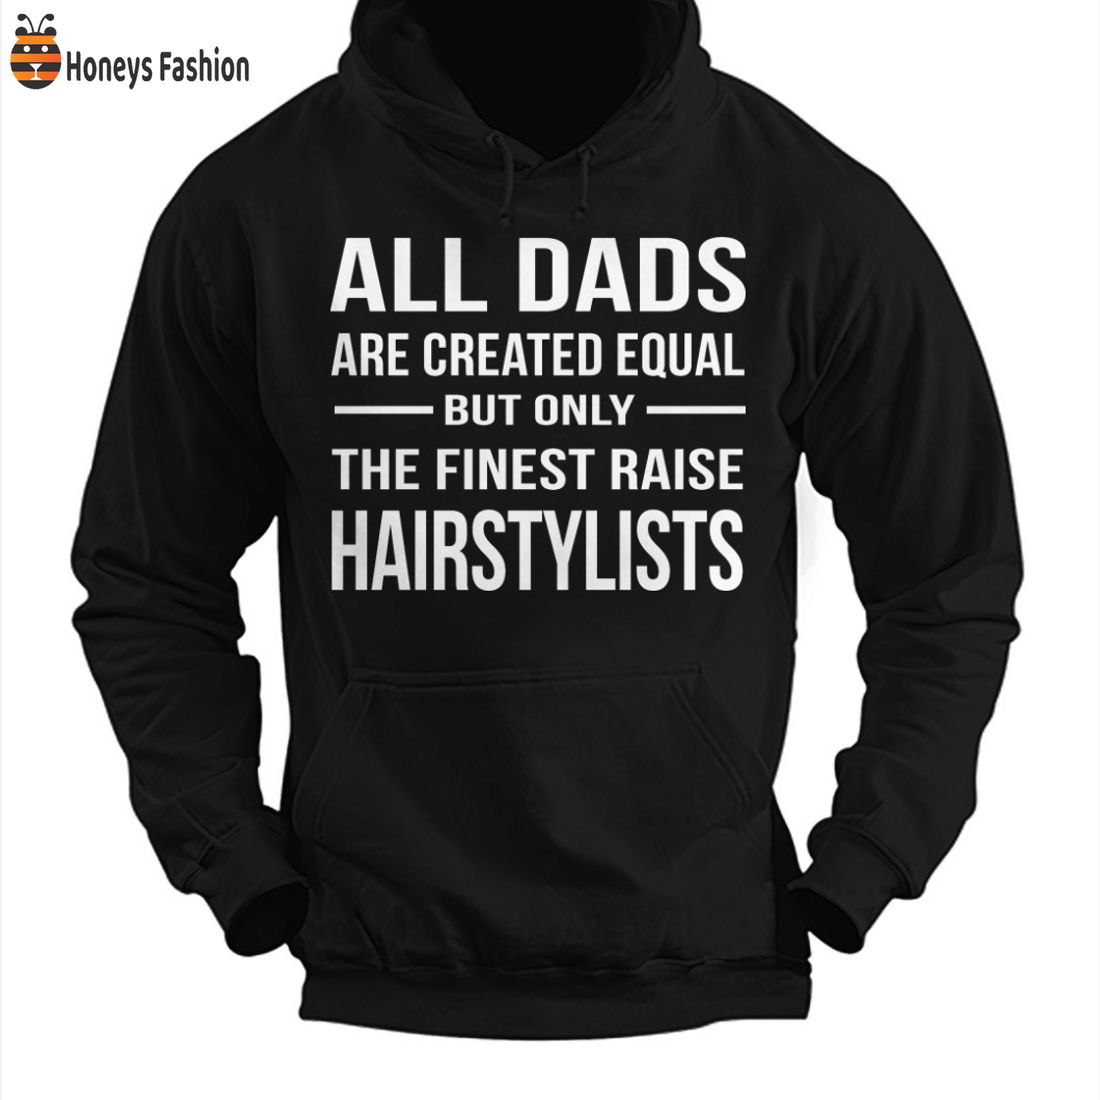 BEST All Dads Are Created Equal But Only Finest Raise Hairstylist 2D Hoodie T Shirt